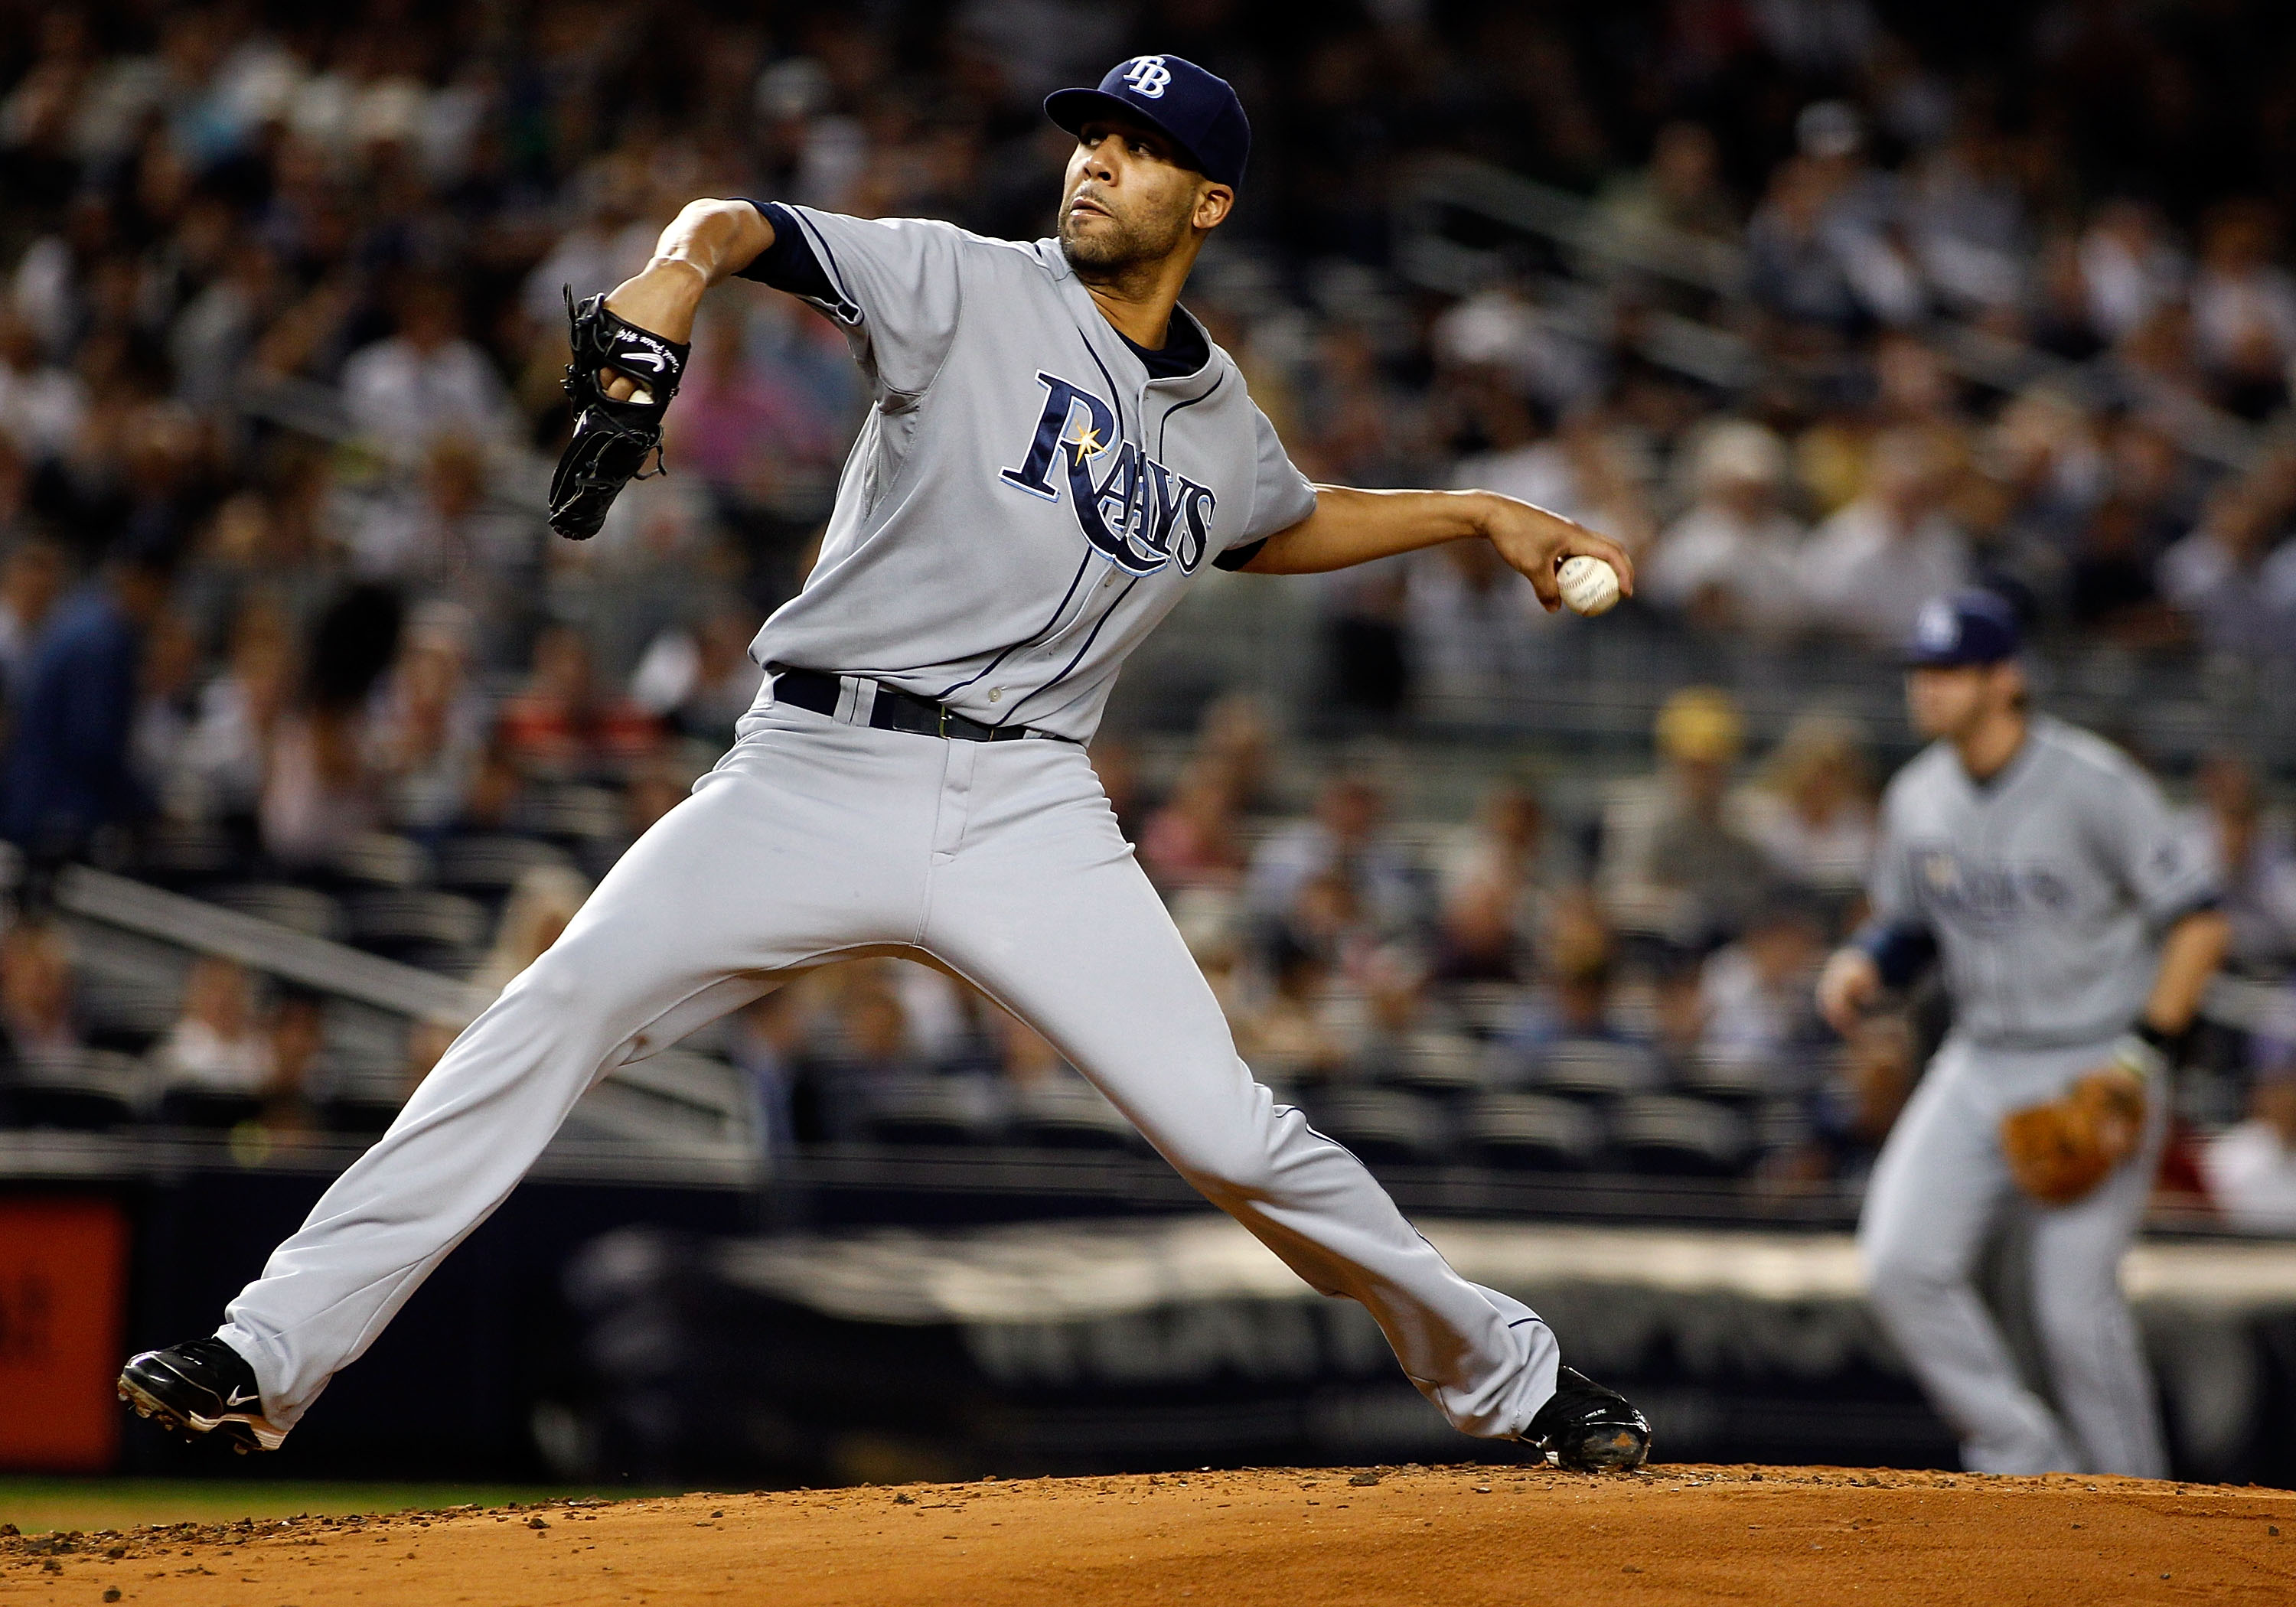 NEW YORK - SEPTEMBER 23:  David Price #14 of the Tampa Bay Rays delivers a pitch in the first inning against the New York Yankees on September 23, 2010 at Yankee Stadium in the Bronx borough of New York City.  (Photo by Mike Stobe/Getty Images)